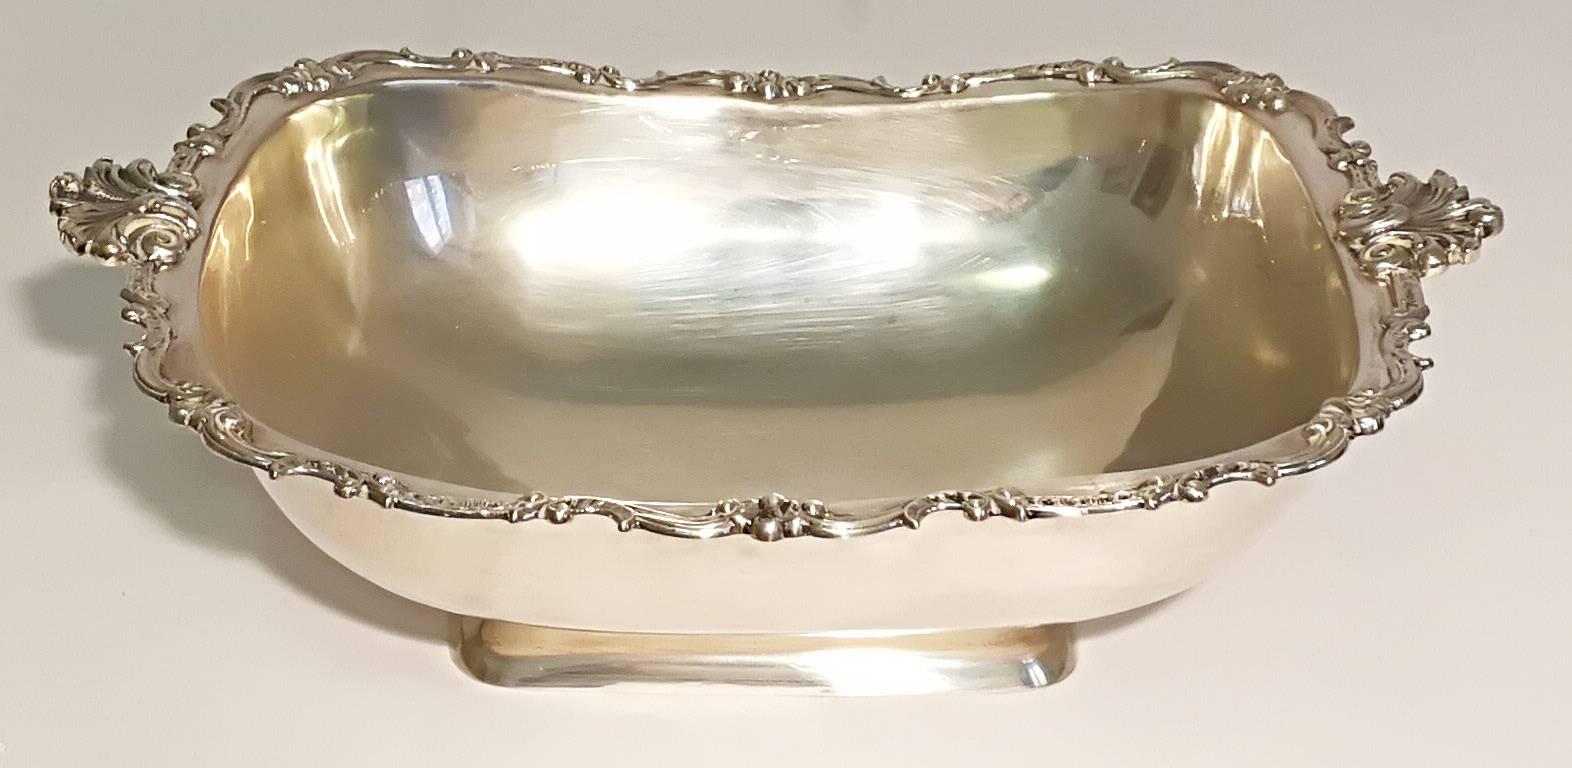 Very nicely decorated silver fruit bowl.